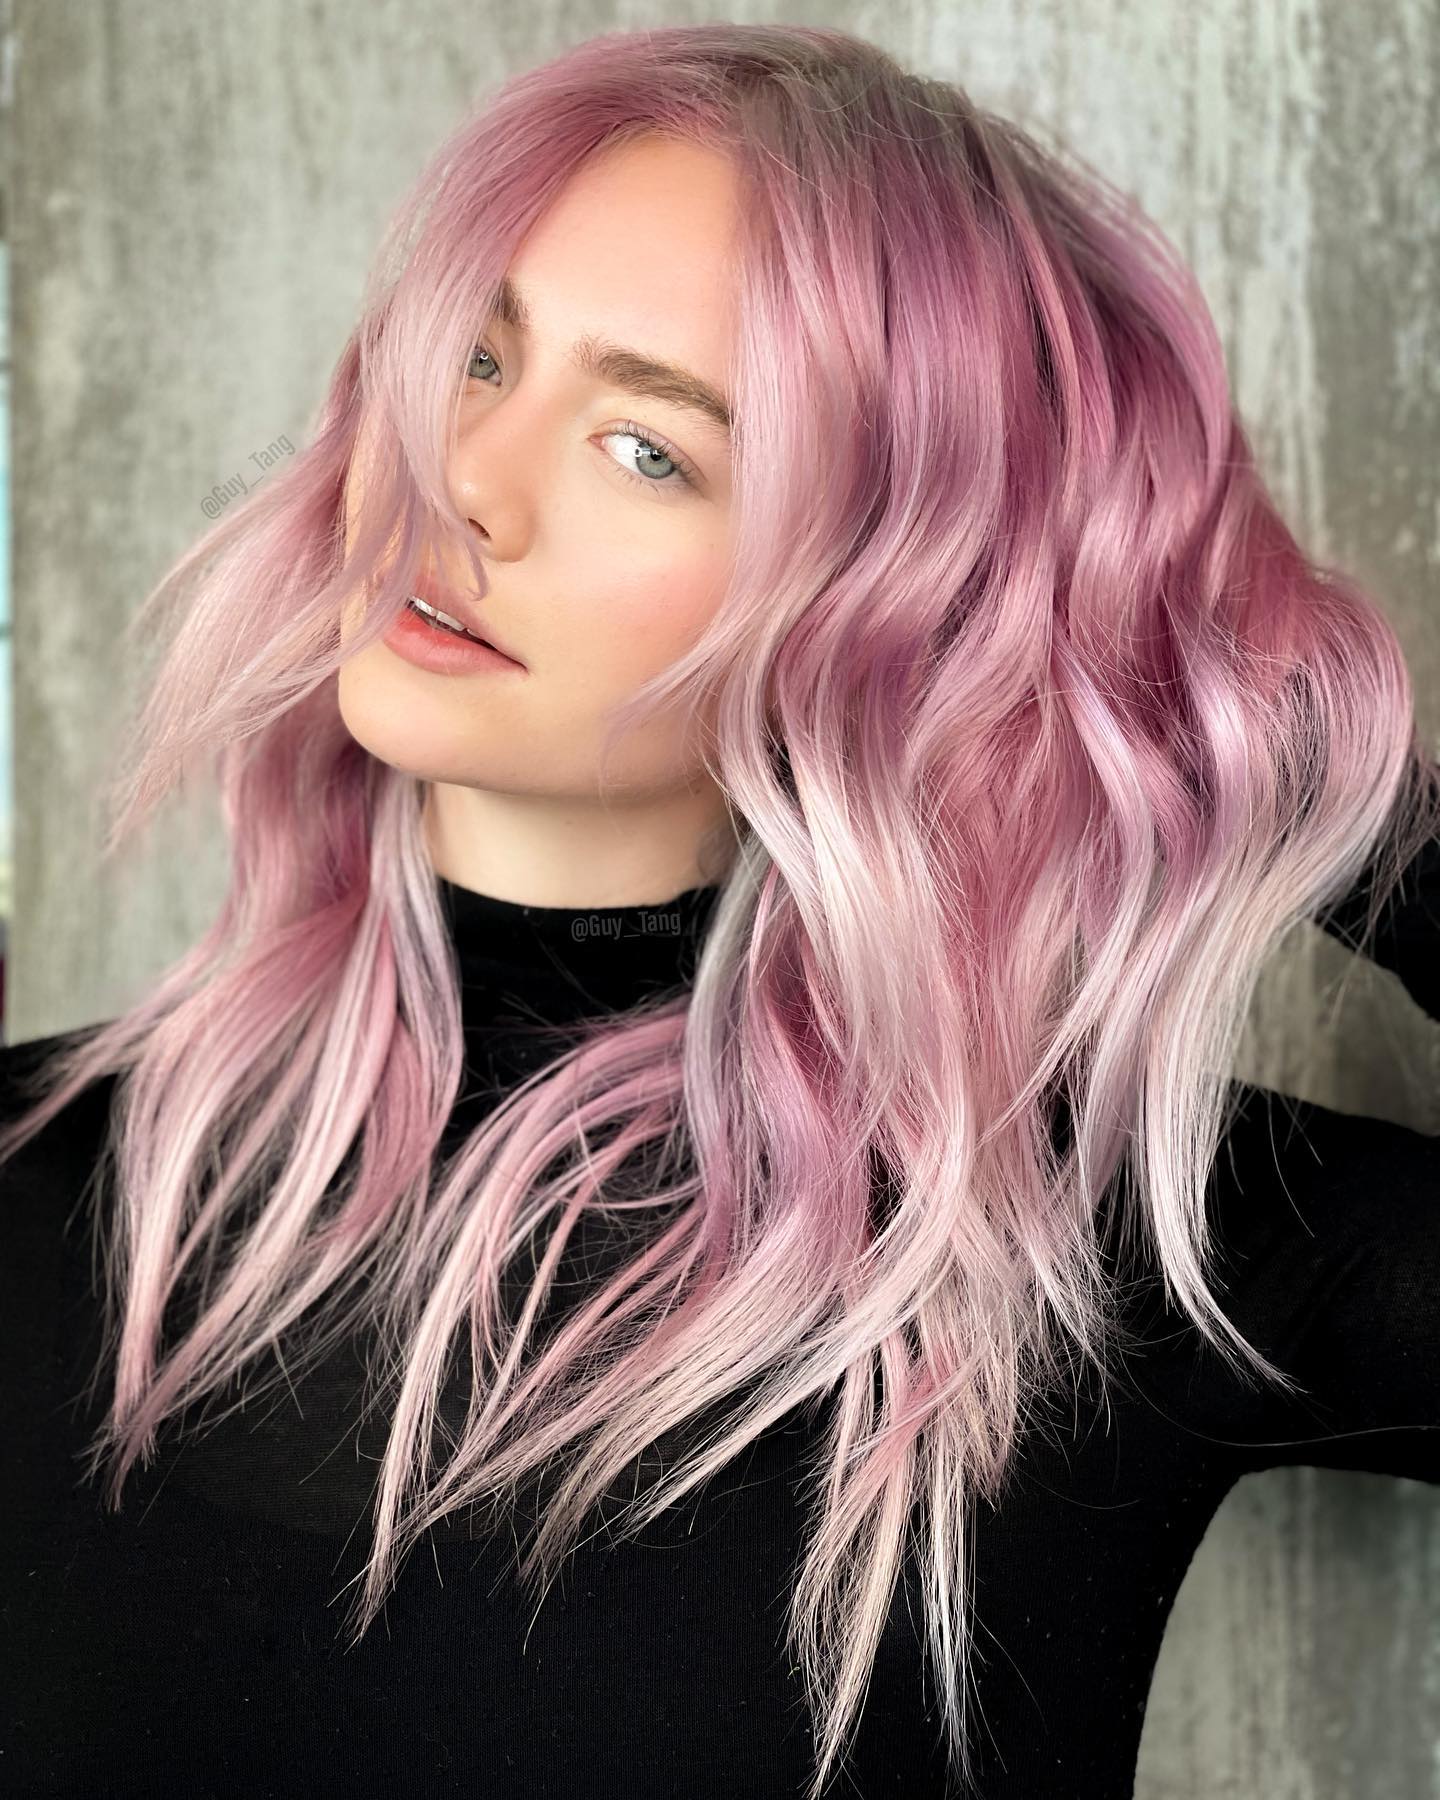 21 Outstanding Hair Color Ideas to Inspire You in 2023 - Hairstylery